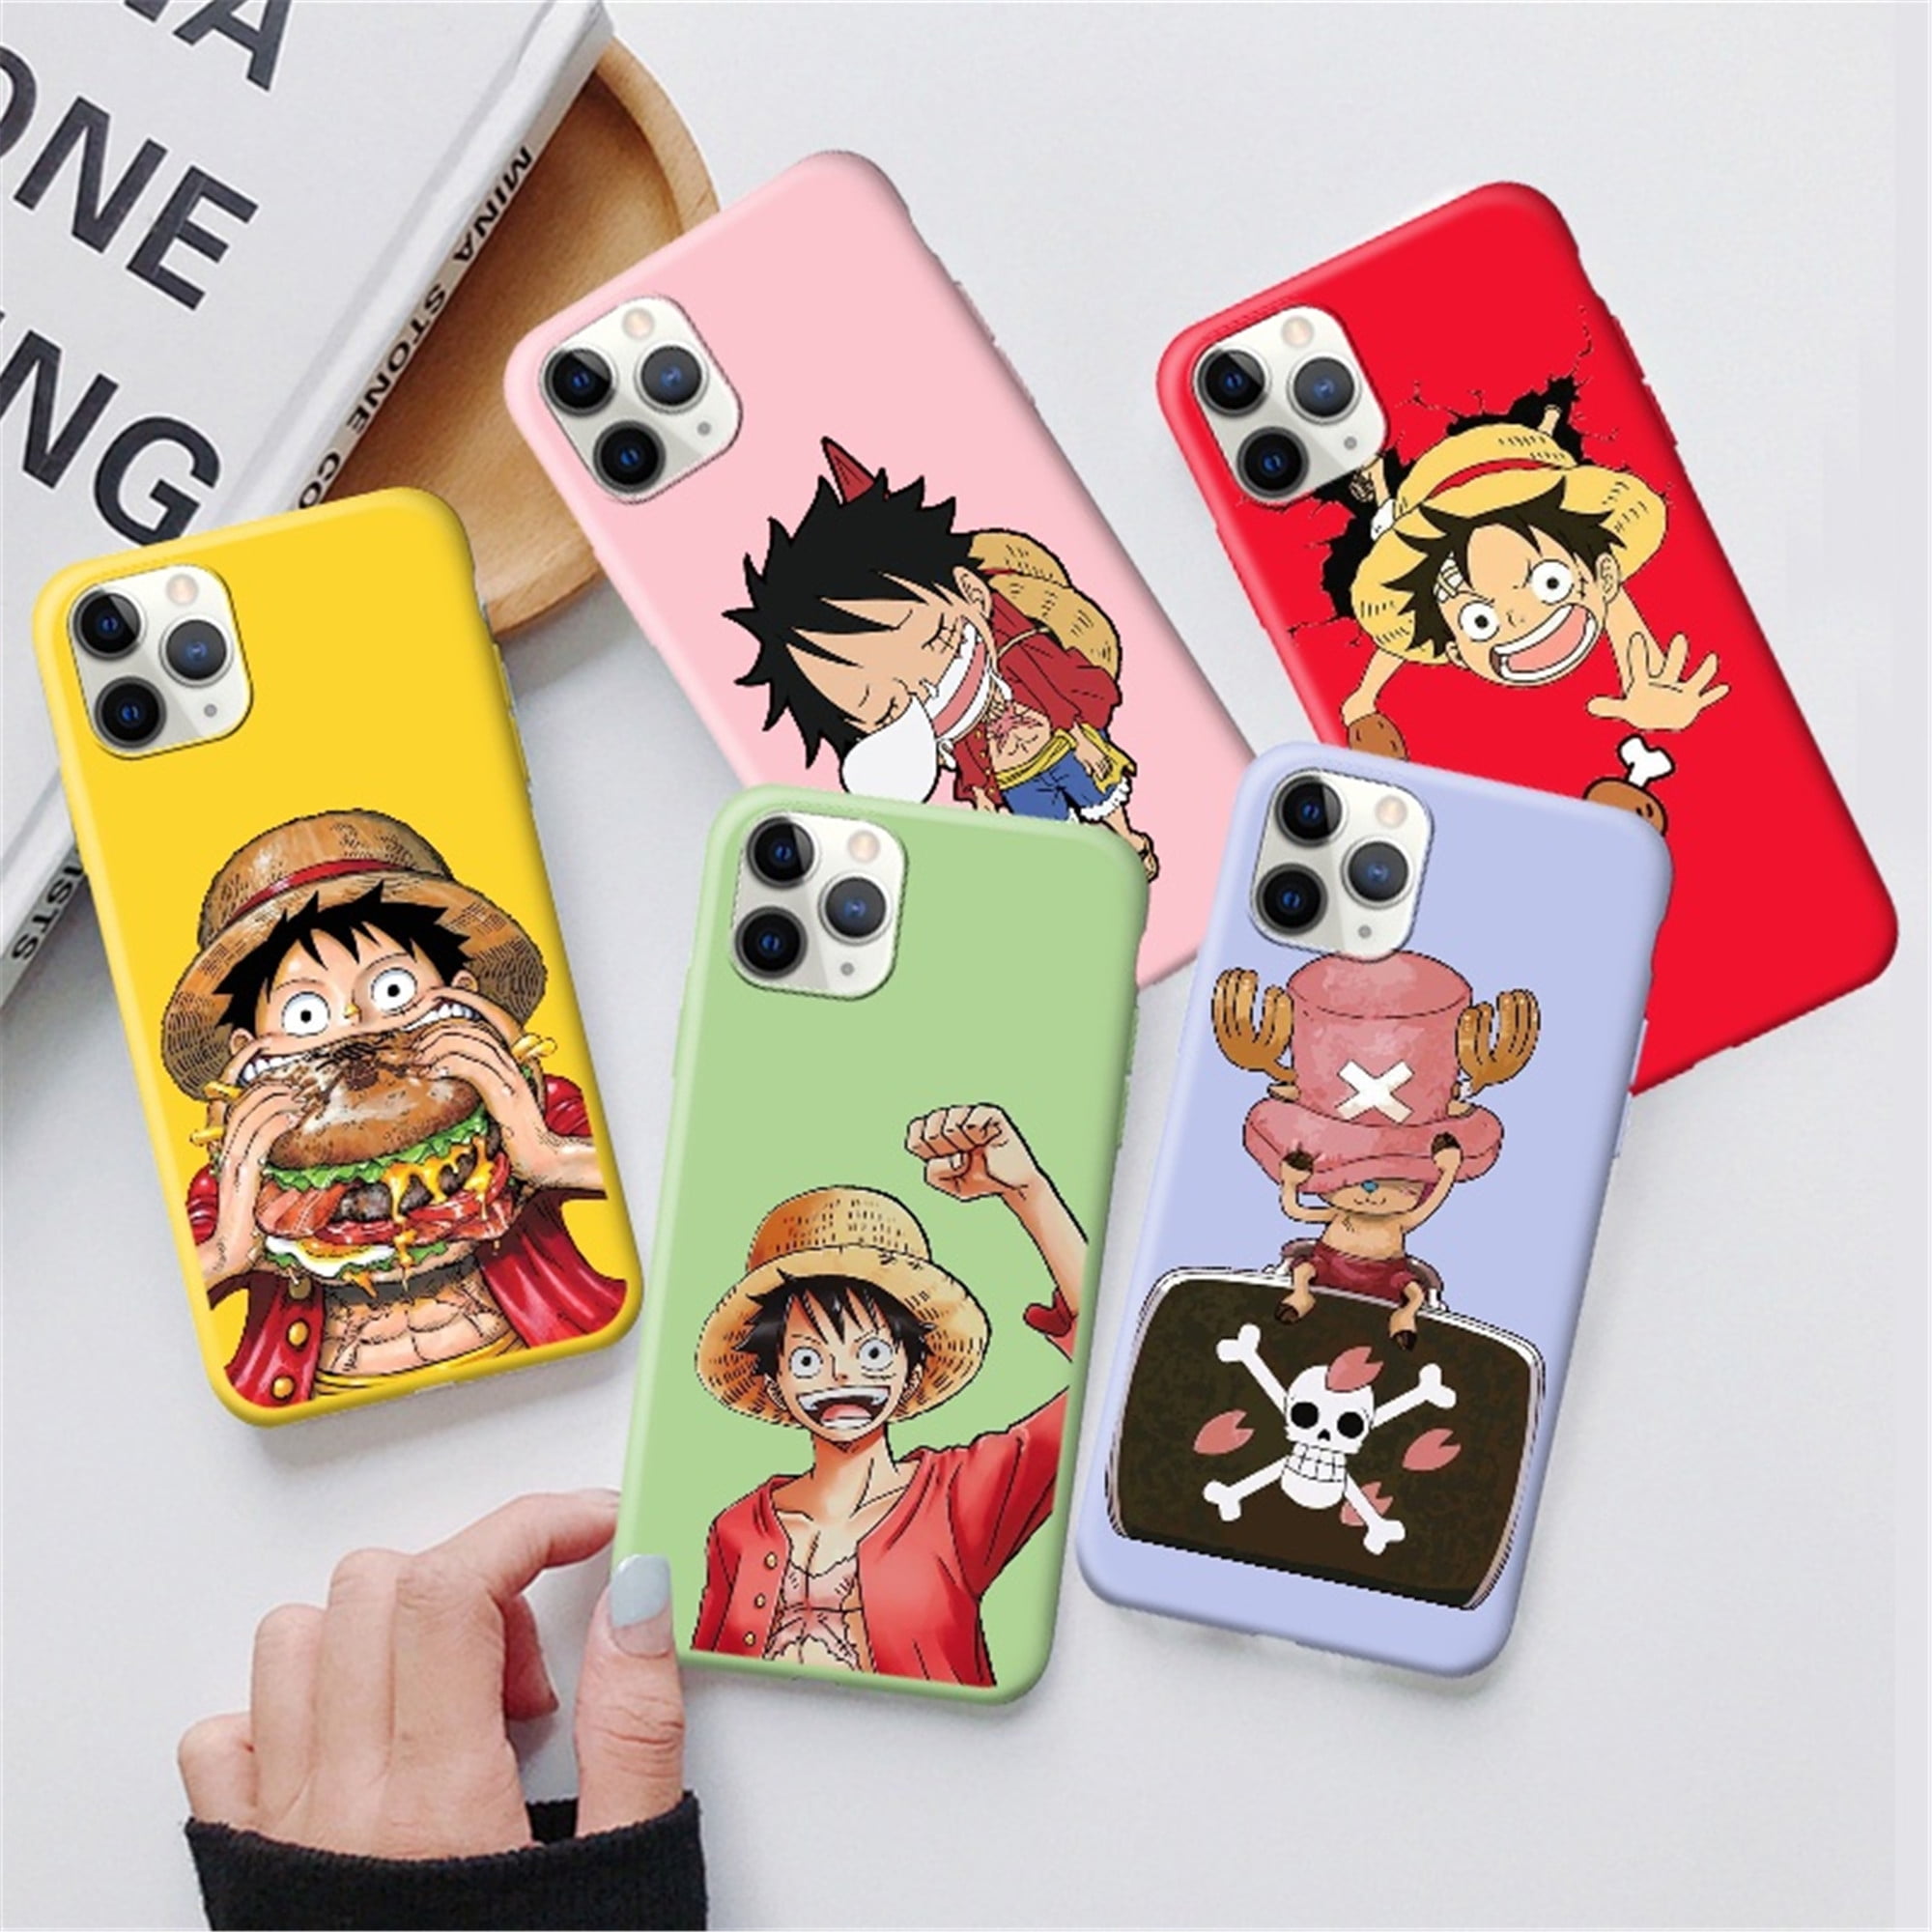 for iPhone 6/6s for iPhone Xs Max Cover Cute Japan Cartoon Anime One Piece Luffy Soft Silicone Case Cover for iPhone Xs Max XR 6S 7 8 Plus for iPhone Xs Max Case 